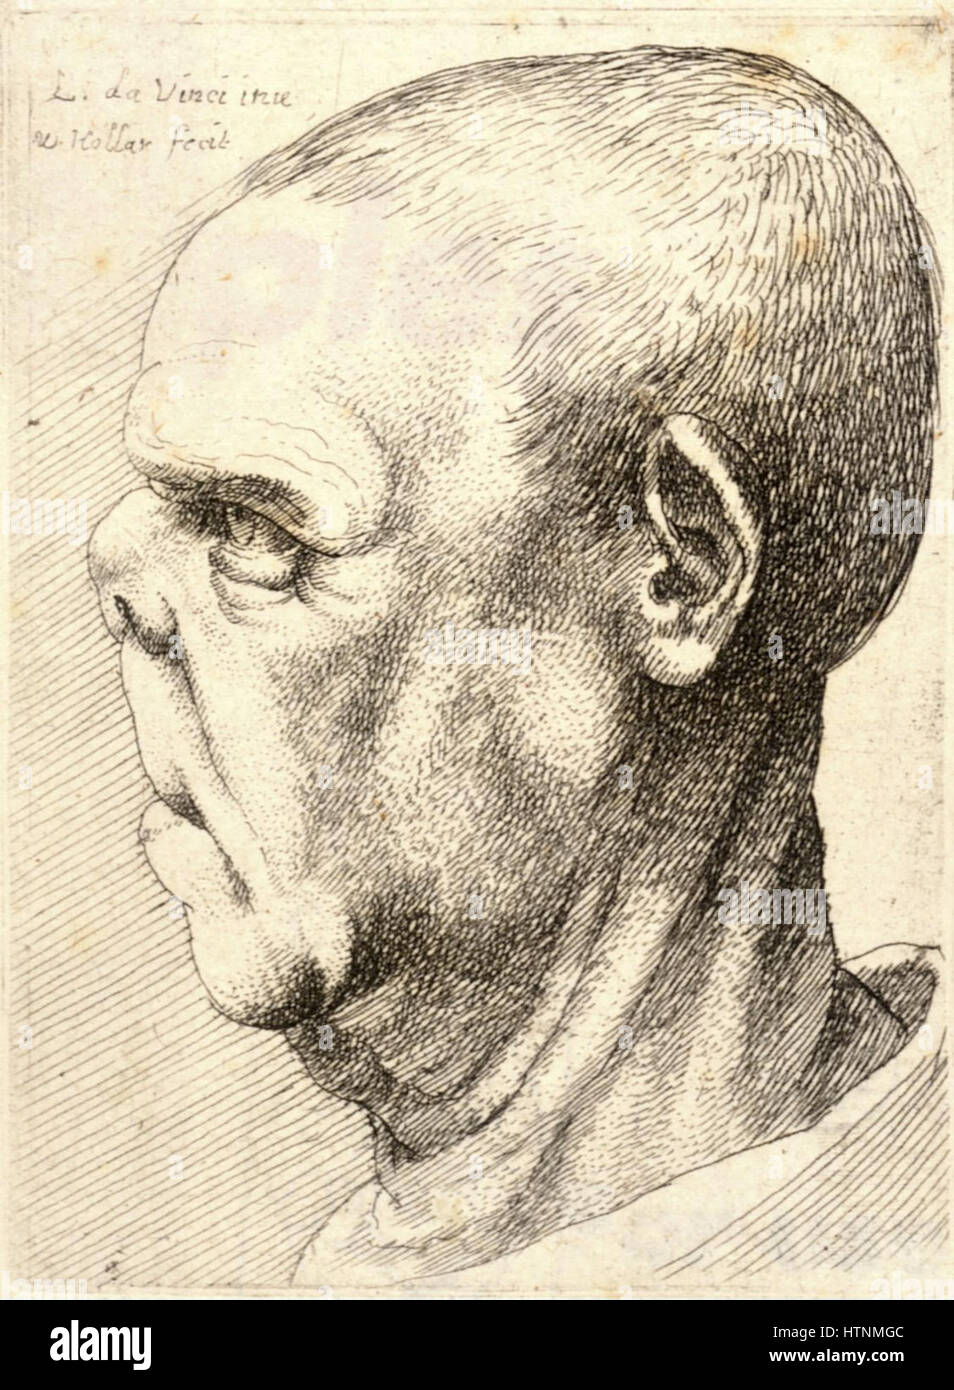 Wenceslas Hollar - Man with flattened nose and elongated upper lip Stock Photo